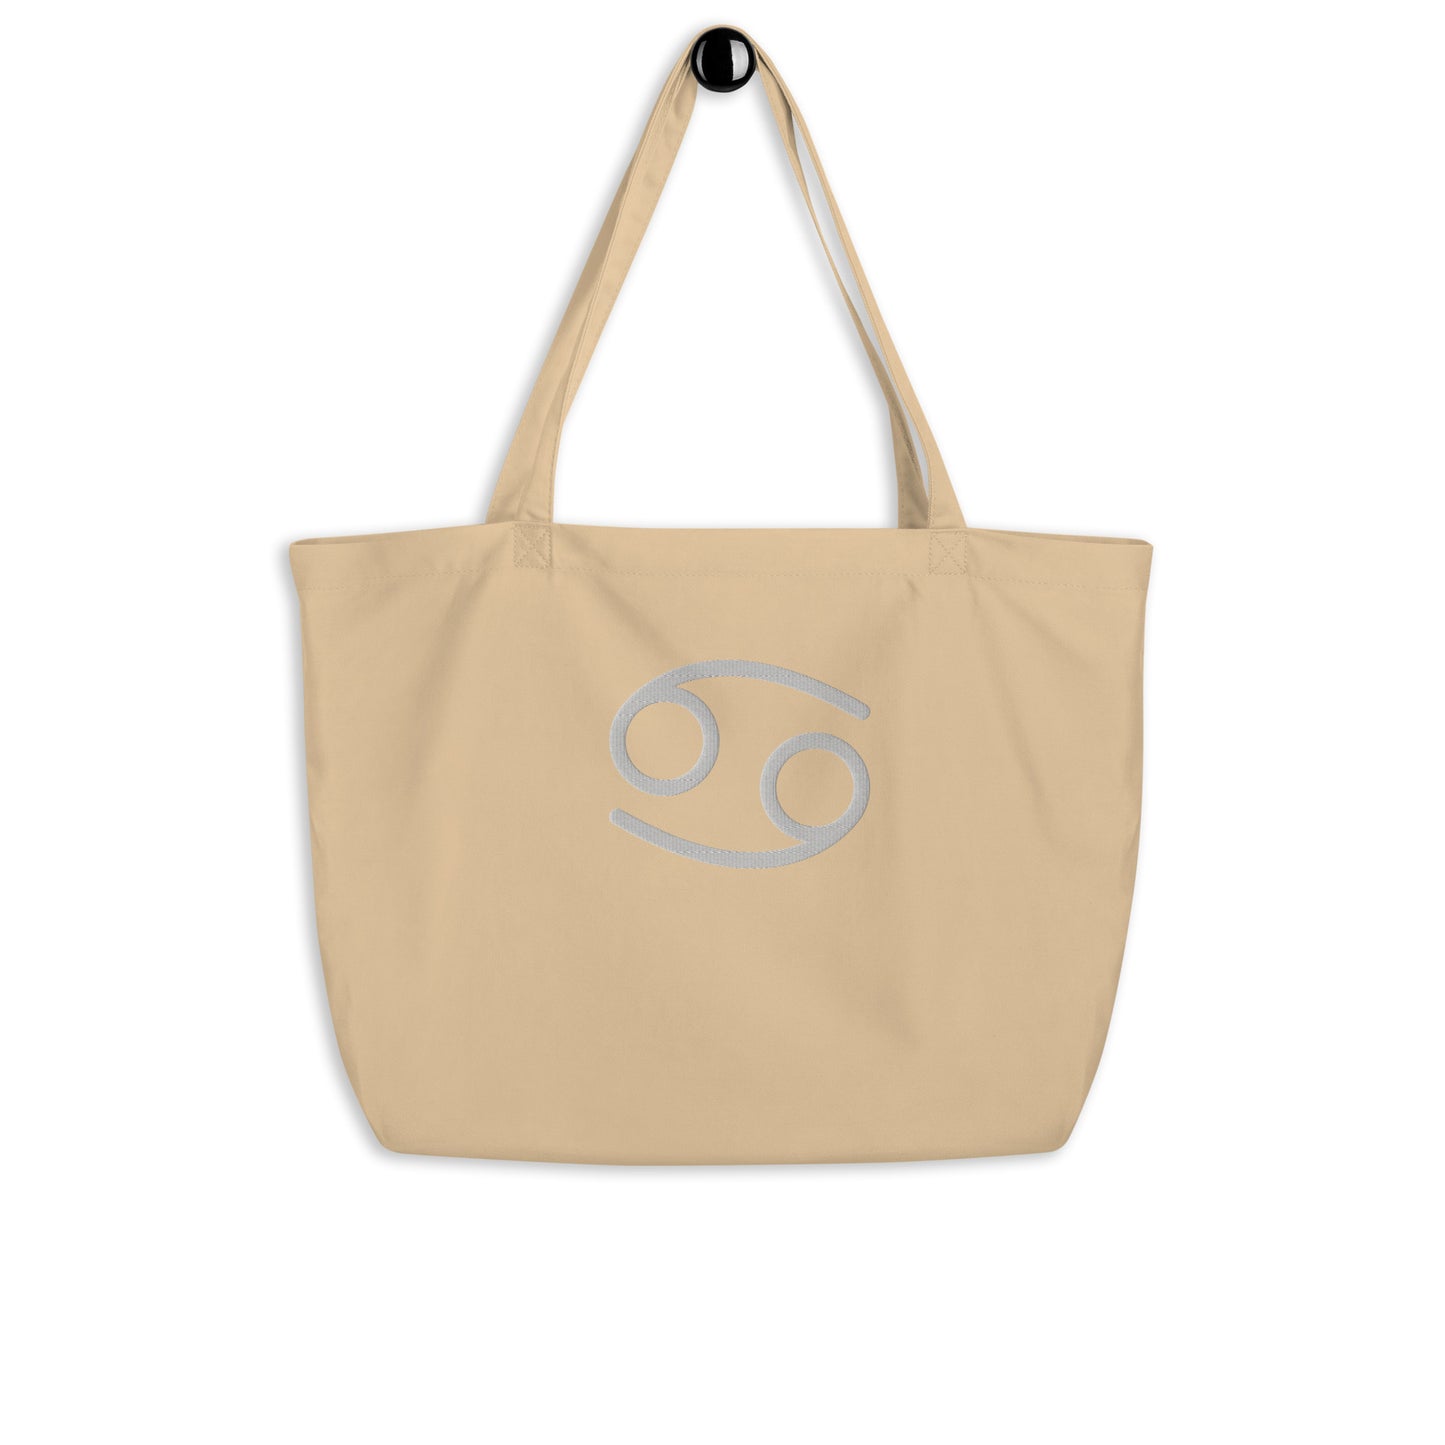 Cancer - Large Open Tote Bag - White Thread